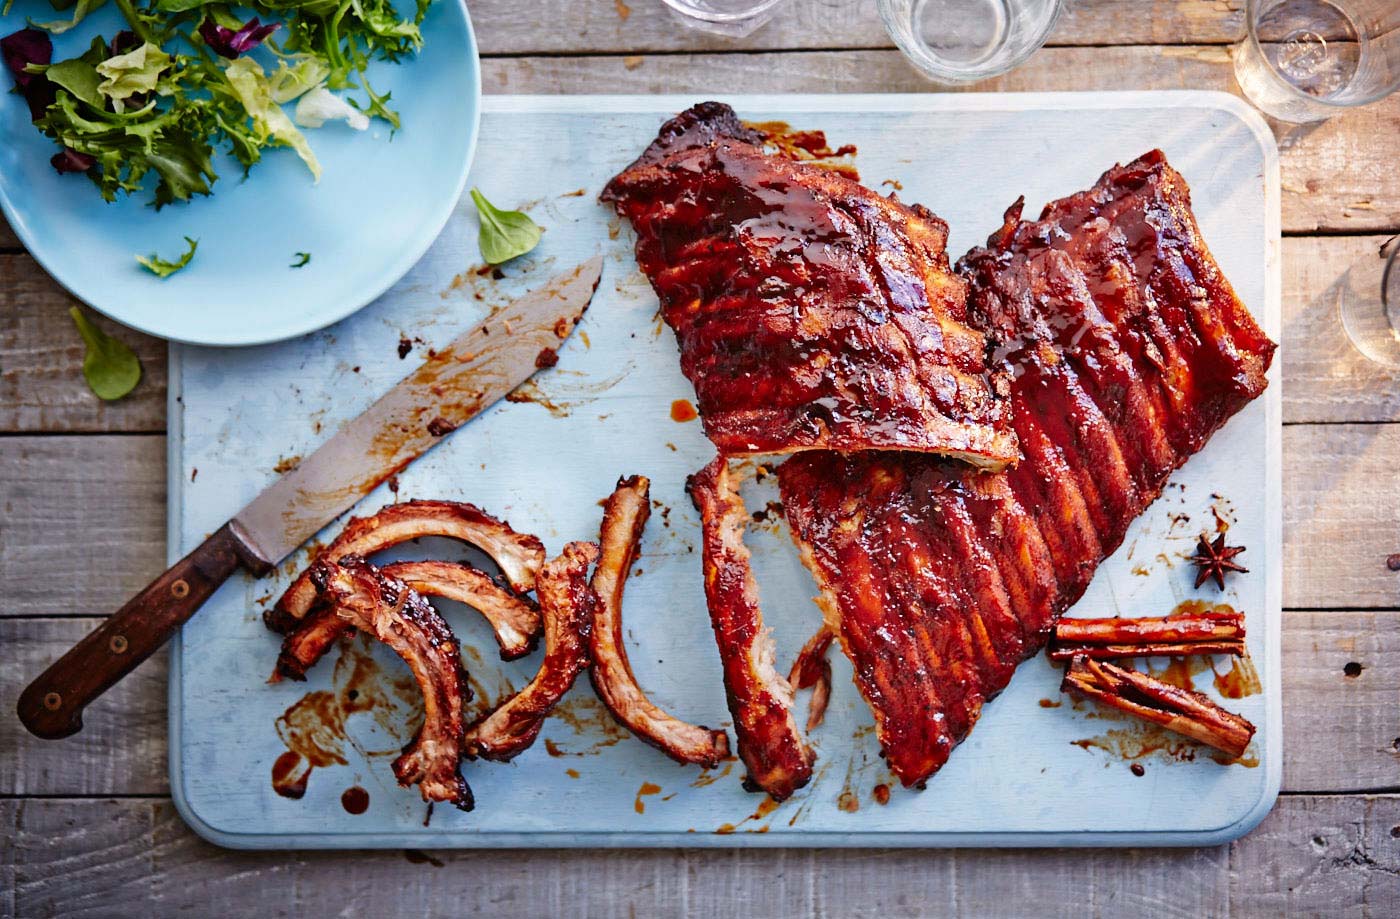 🥩 If You’ve Eaten 14/27 of These Meats, You’re Definitely a Carnivore Barbecue ribs